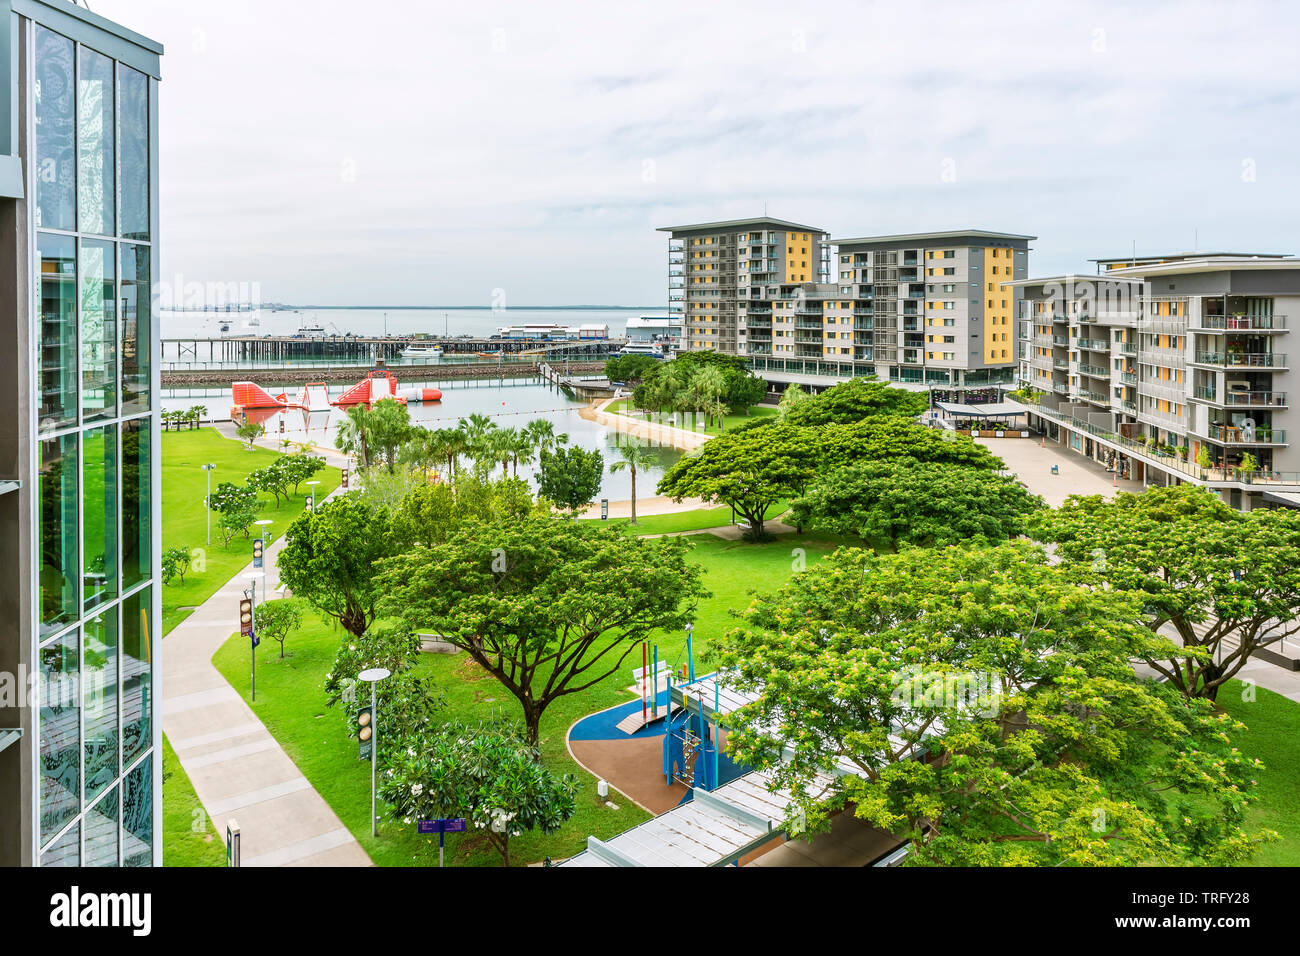 Beautiful day view of the Darwin Waterfront, Australia, in a moment of tranquility Stock Photo